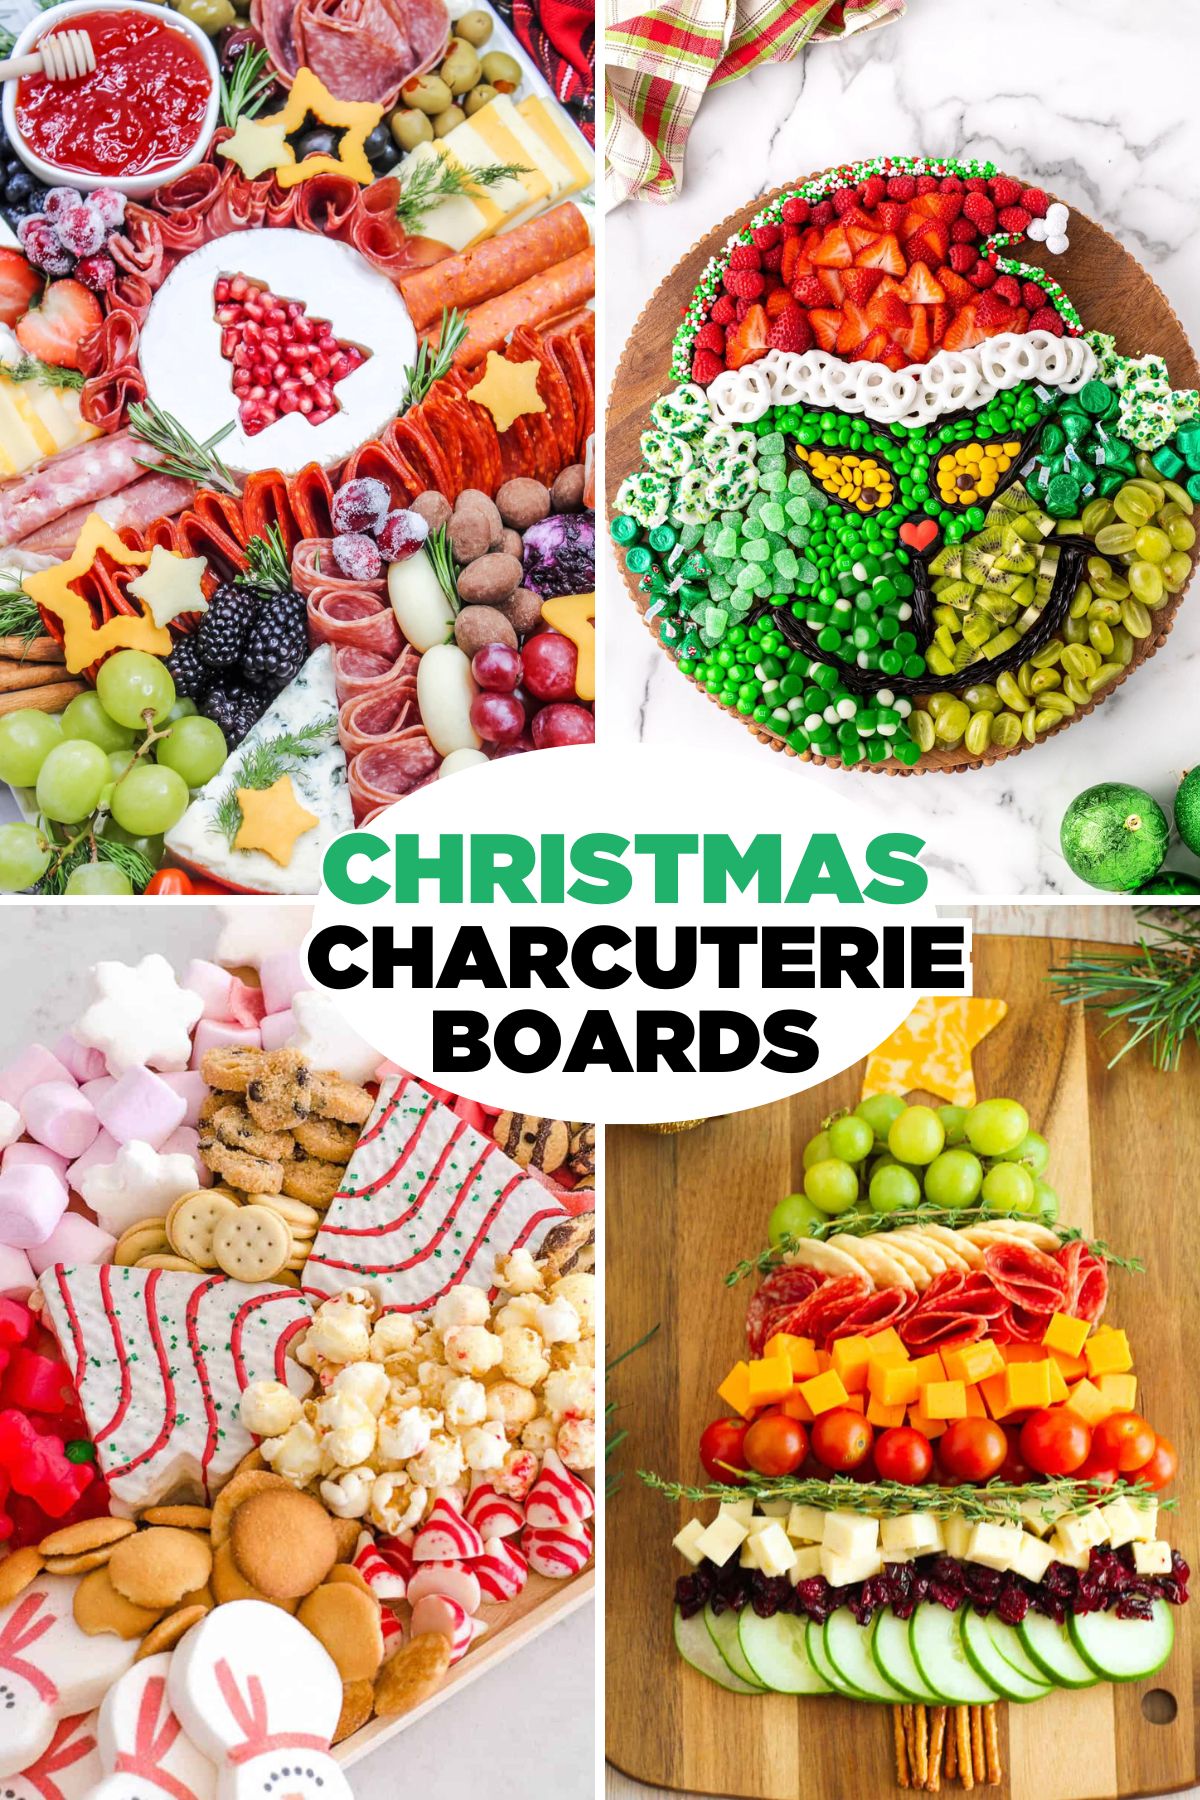 A festive display of Christmas charcuterie boards, filled with delicious ideas for your holiday gatherings.